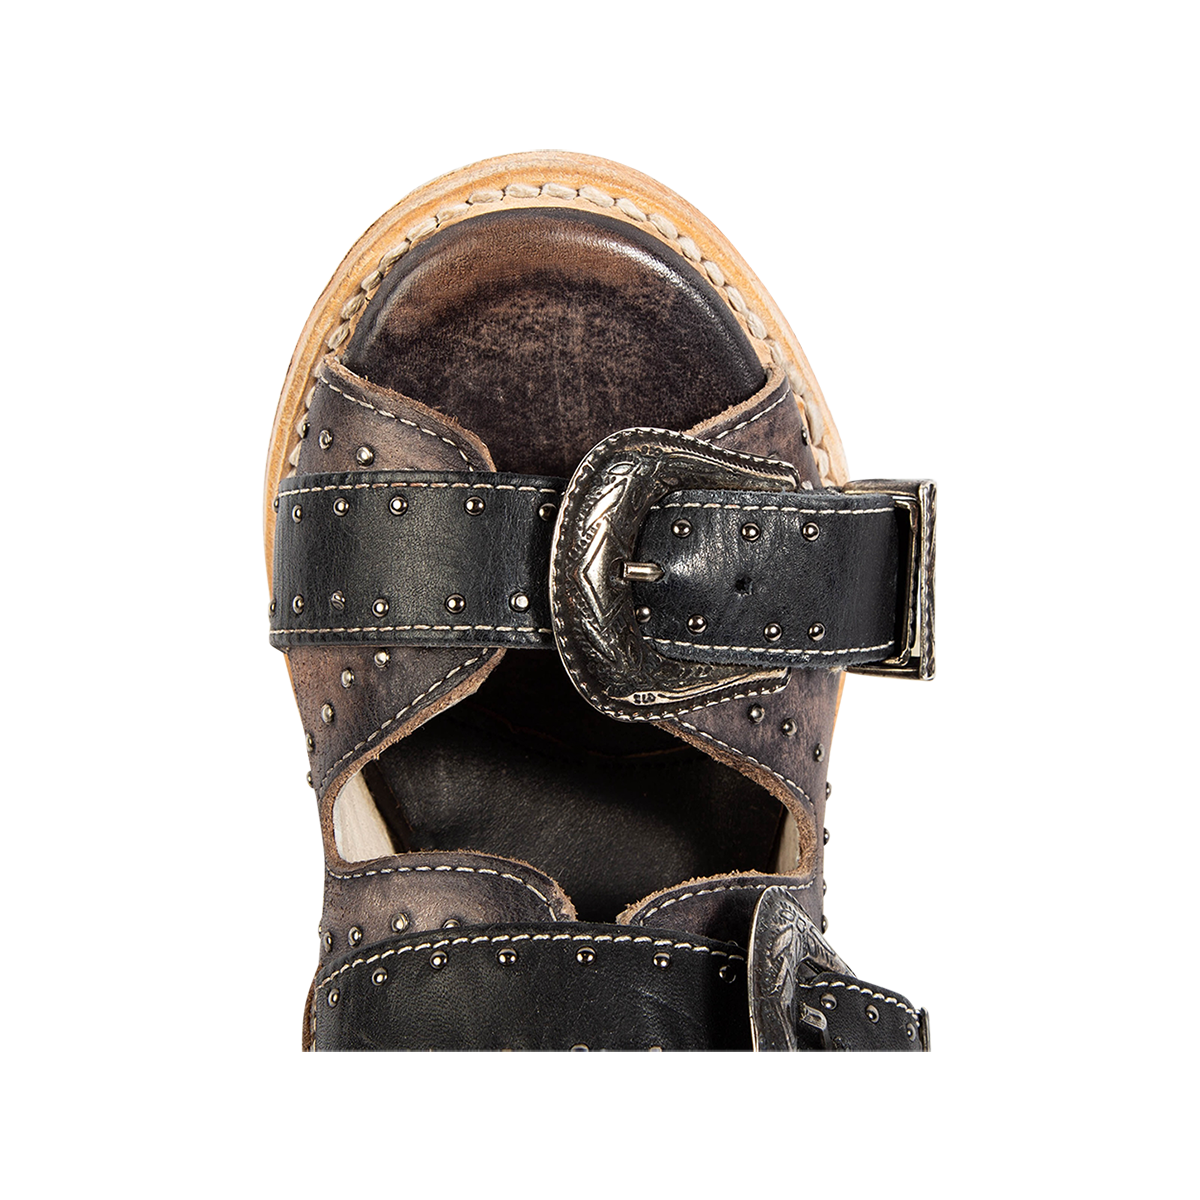 Top view showing a rounded toe and shaft buckles on FREEBIRD women's Violet black distressed leather sandal 